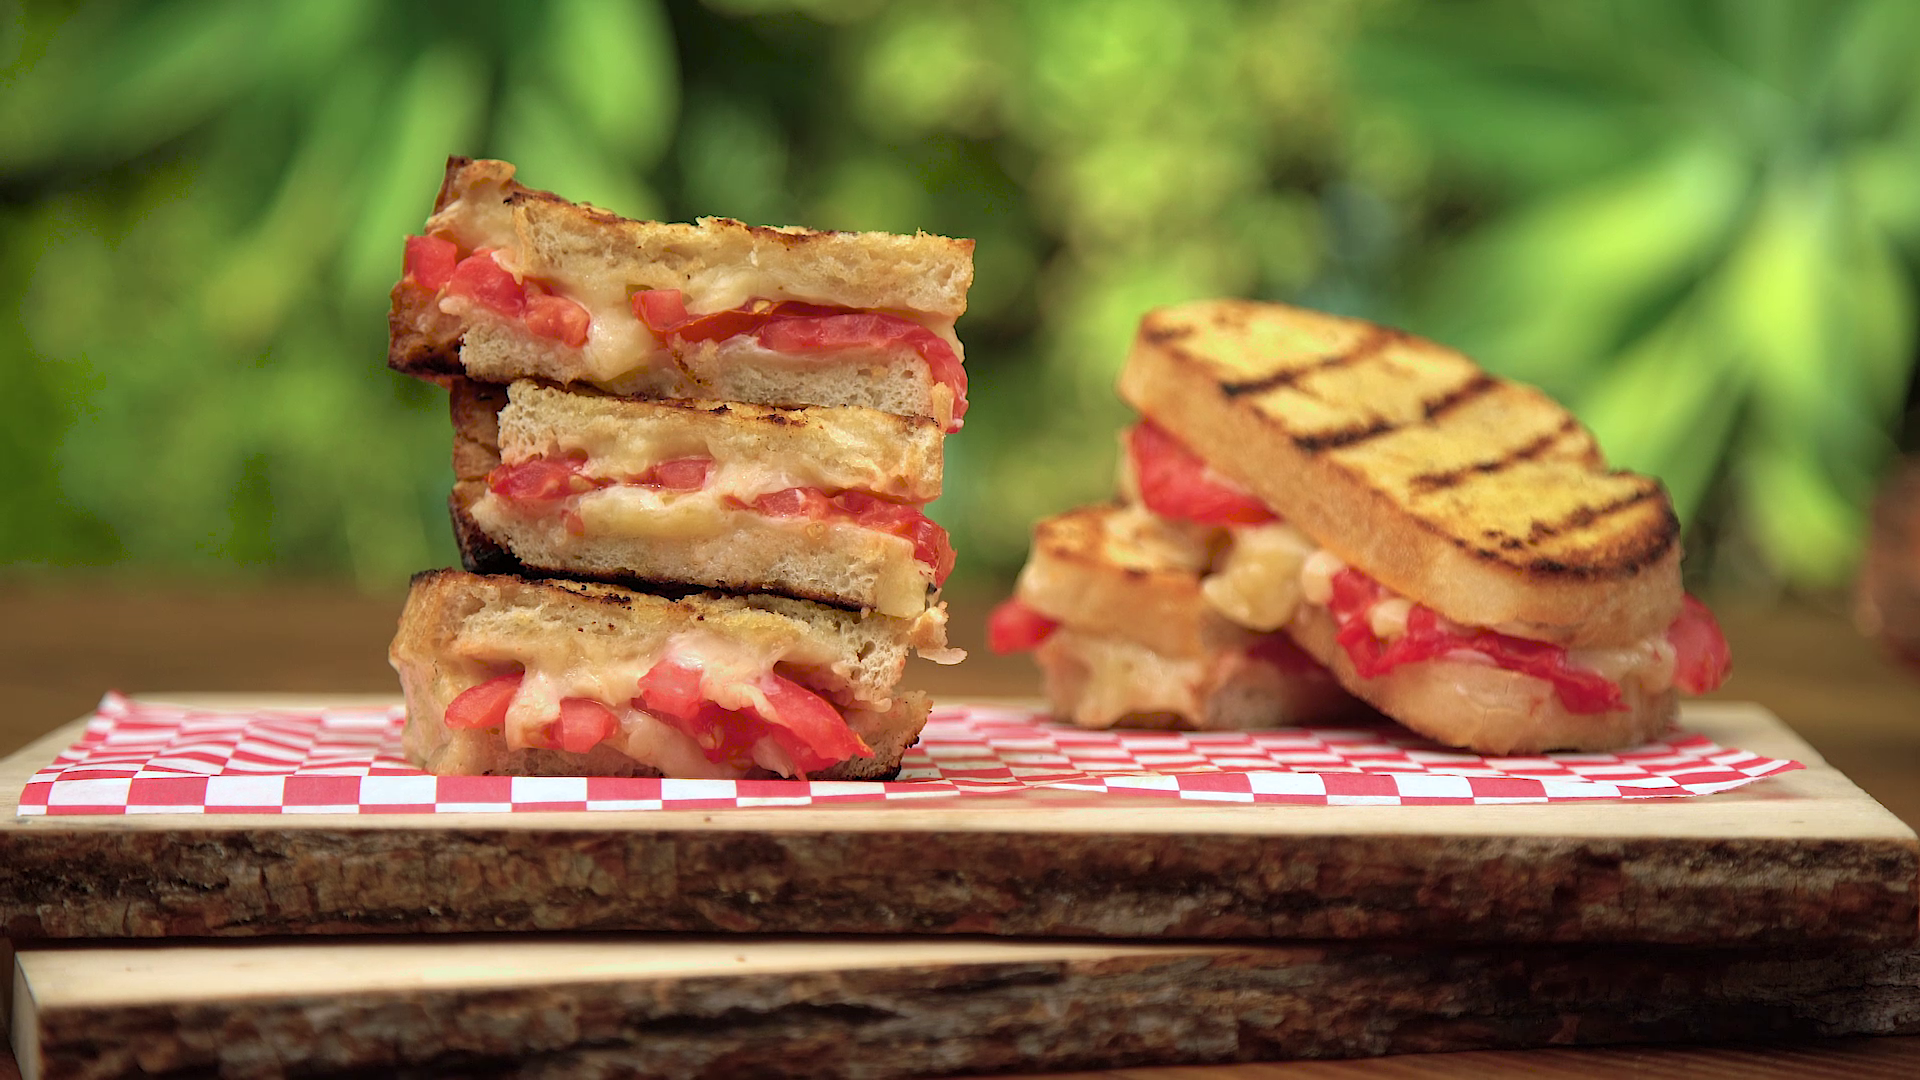 Grilled 3 Cheese Sandwich With Tomato .tastemade.com